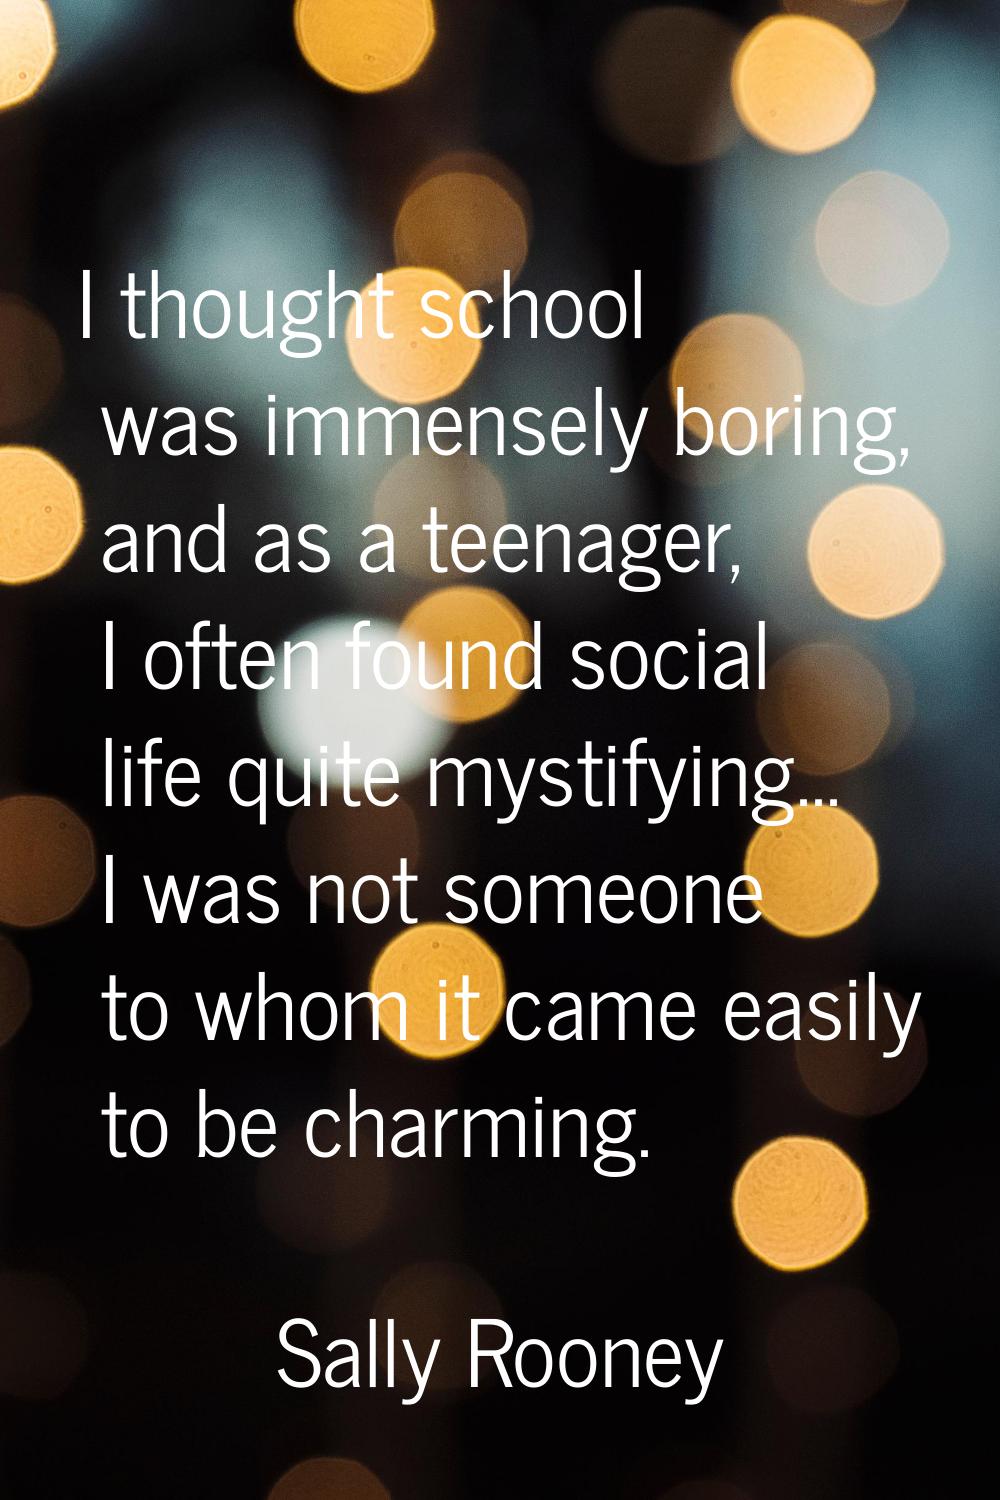 I thought school was immensely boring, and as a teenager, I often found social life quite mystifyin